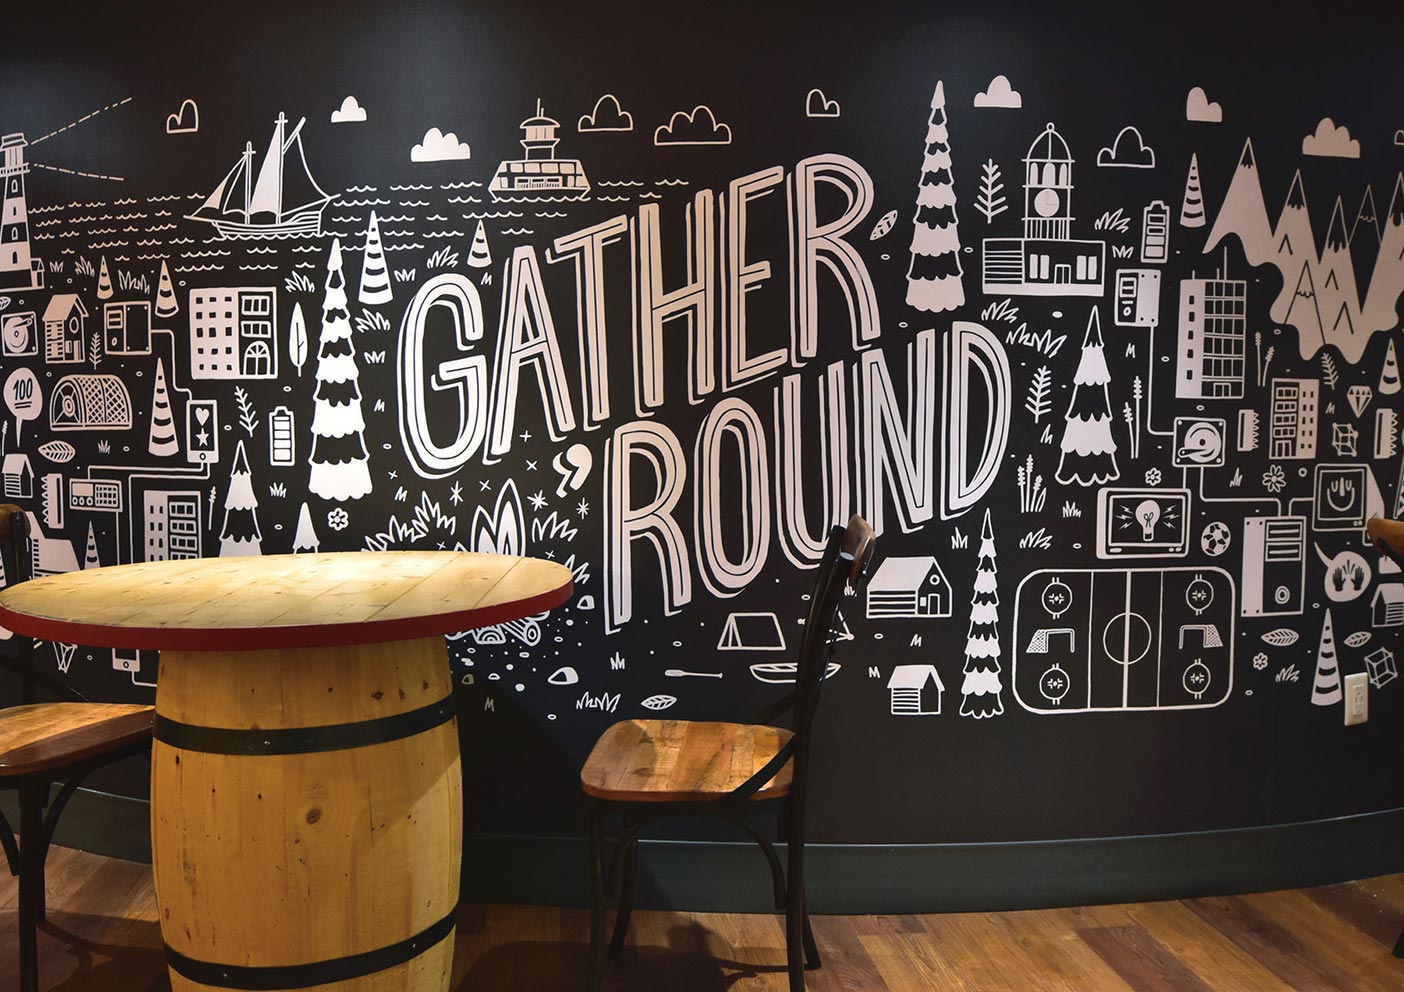 A wall found in the REDspace office kitchen is decorated with a detailed mural that says "Gather Round".